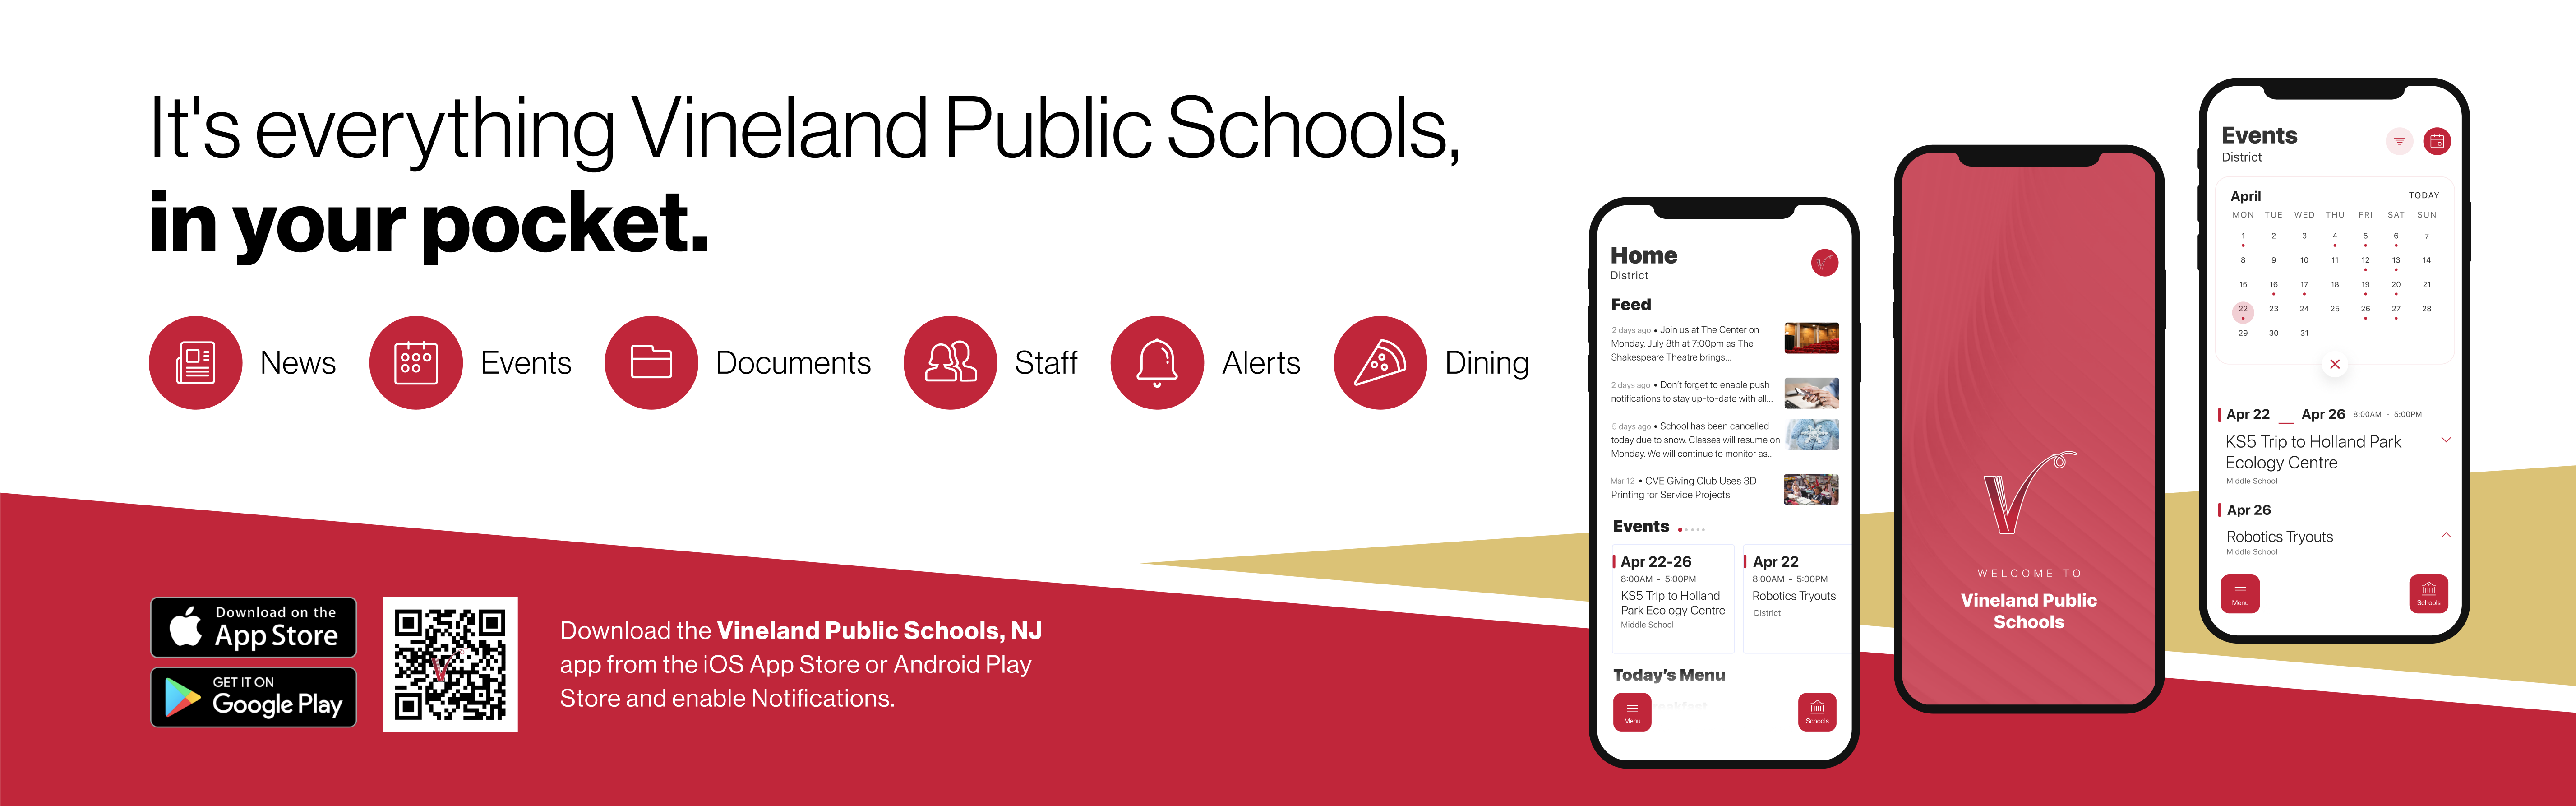 An advertisement for the new Vineland Mobile App. "It's everything Vineland Public Schools, in your pocket."